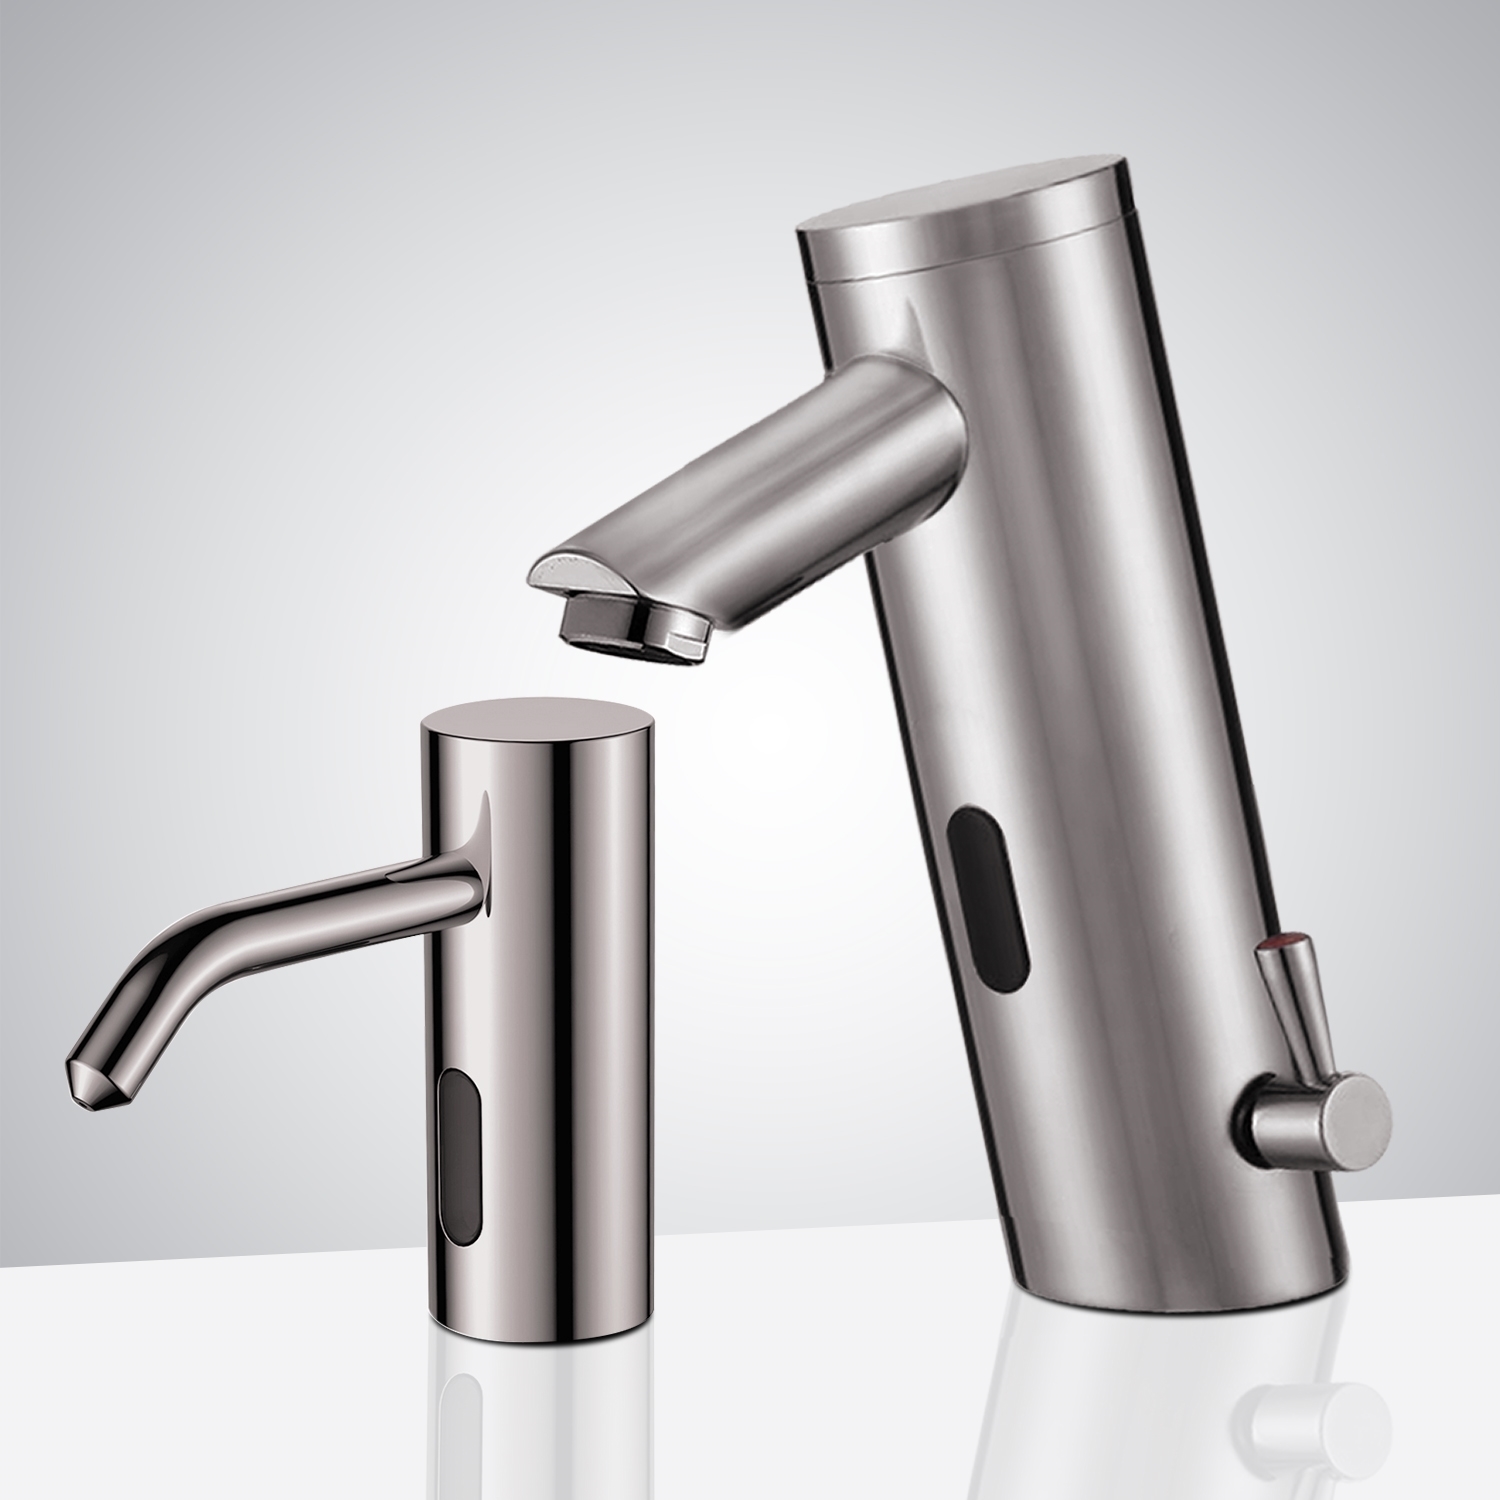 Fontana Platinum Brushed Nickel  Automatic Temperature Control Thermostatic Sensor Tap with Matching Soap Dispenser